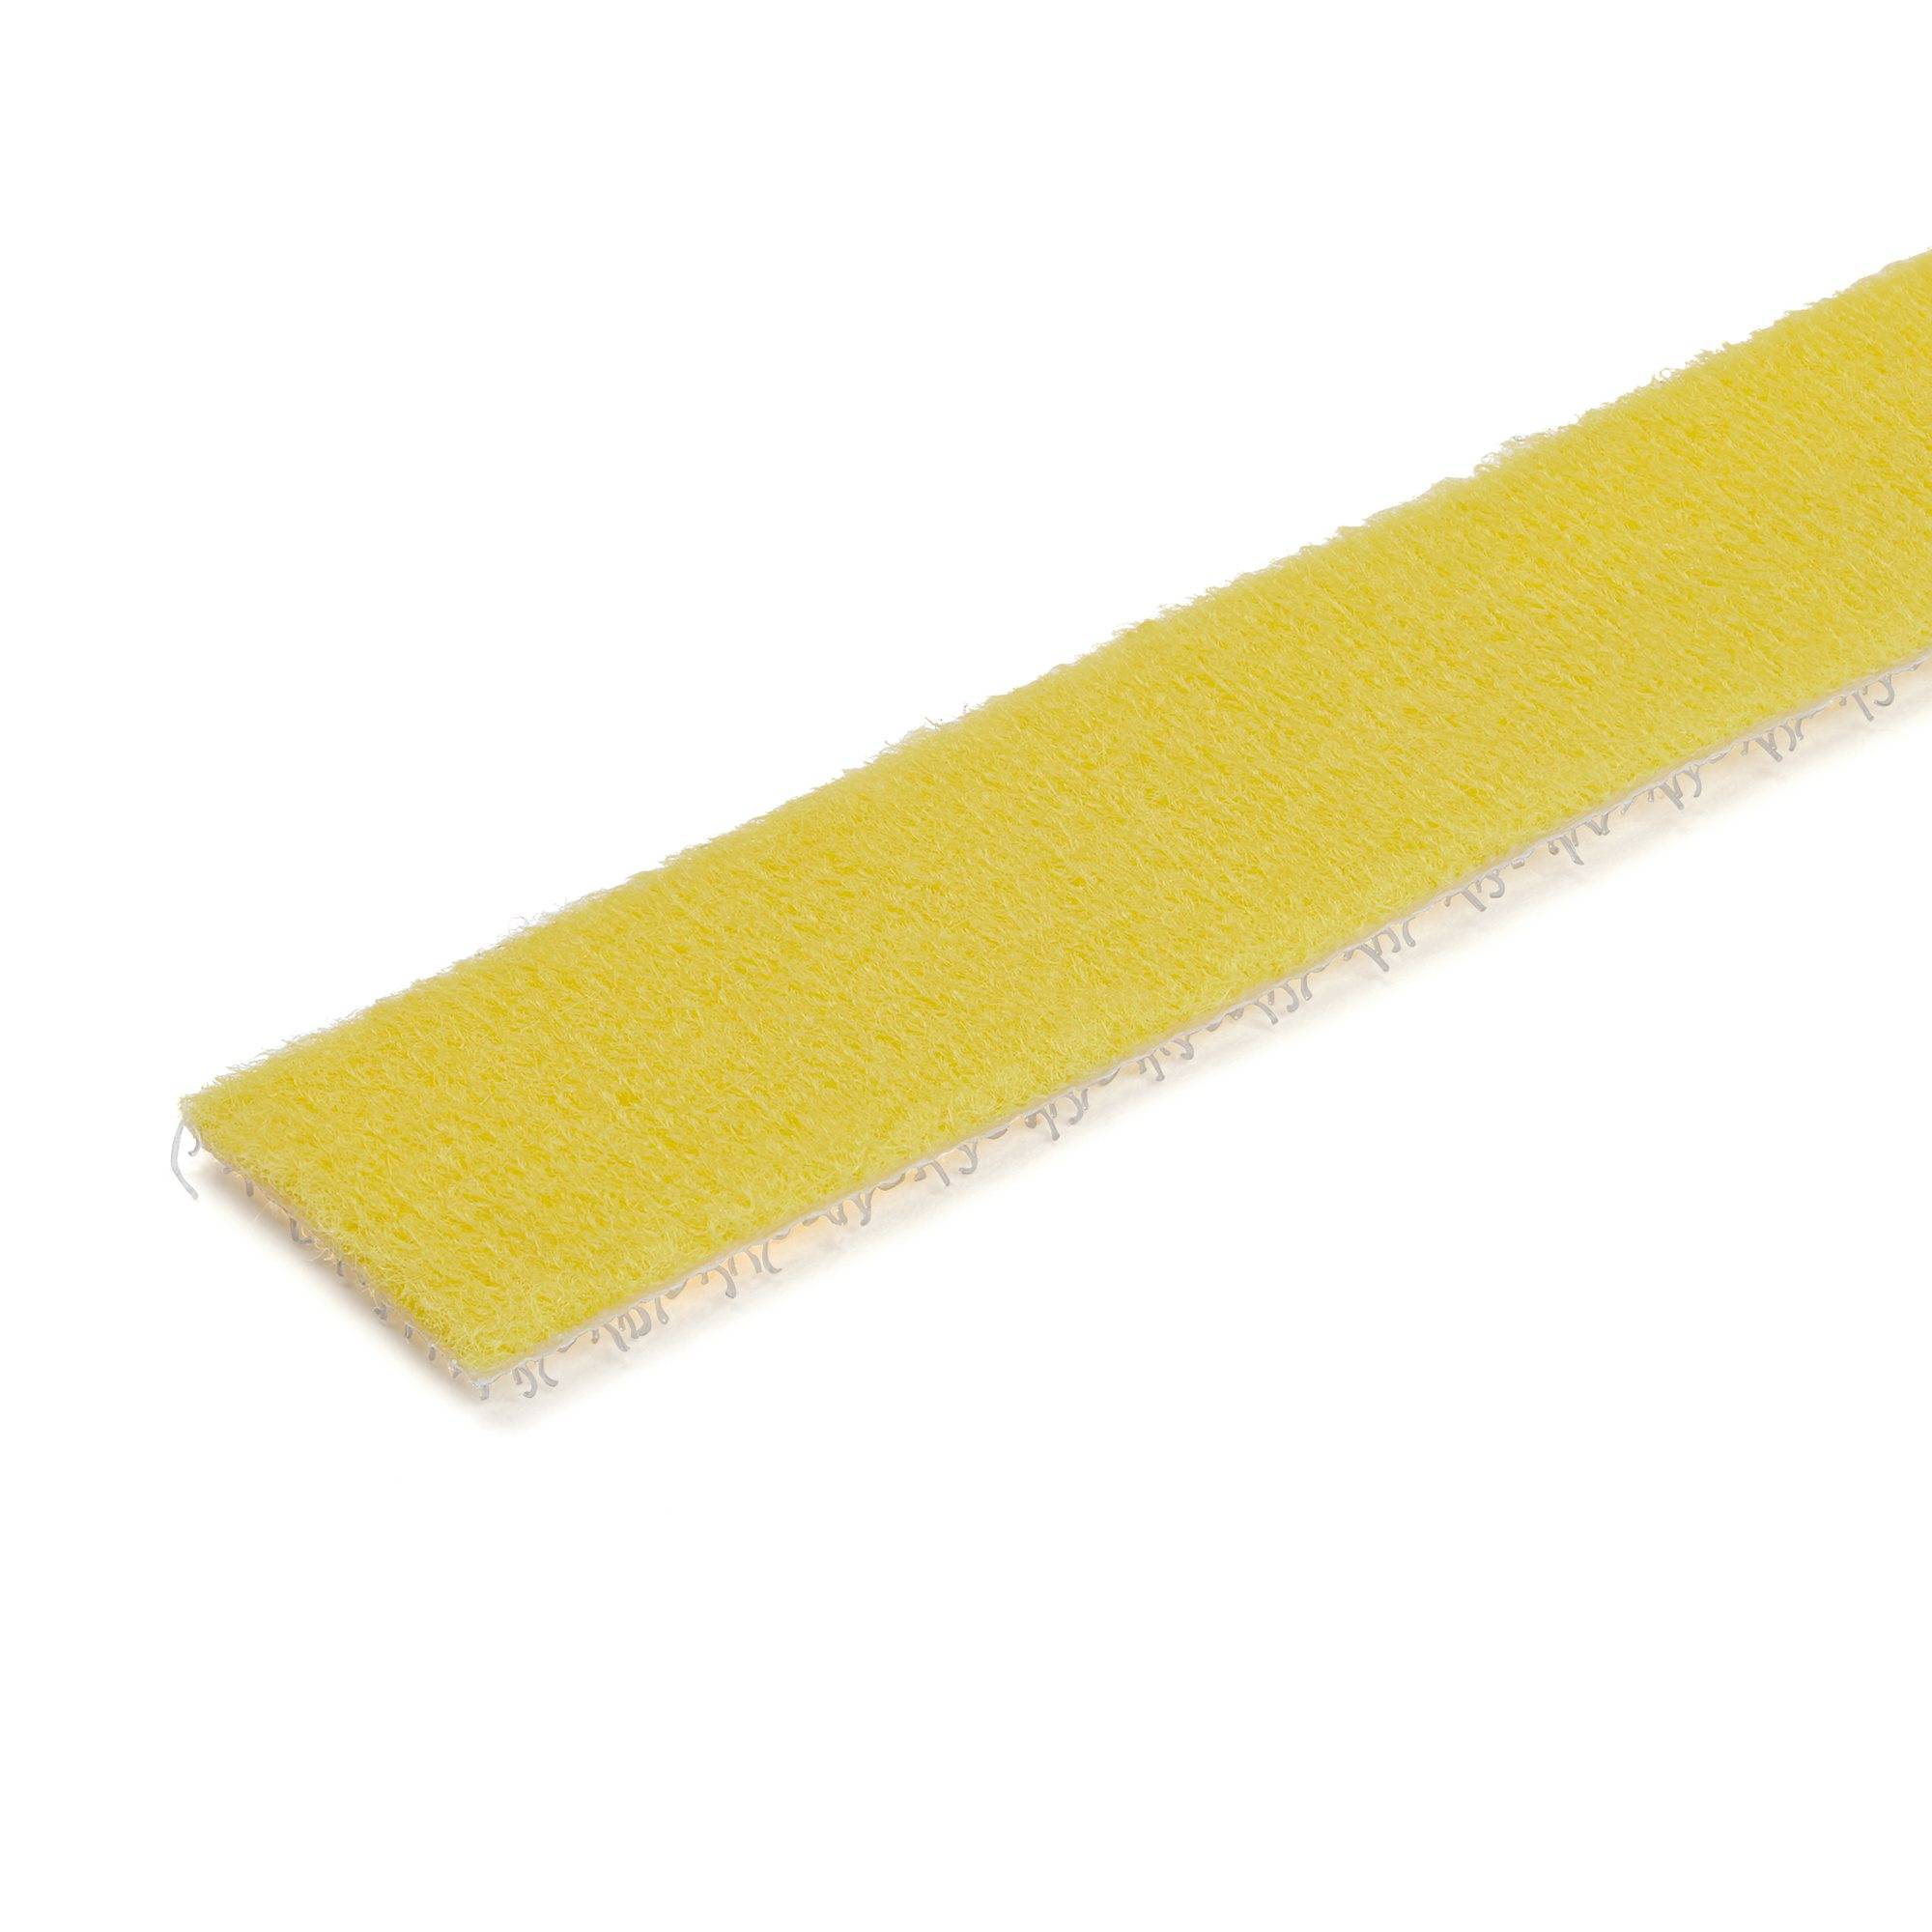 Rca Informatique - image du produit : 100FT. HOOK AND LOOP ROLL - YELLOW - RESUABLE